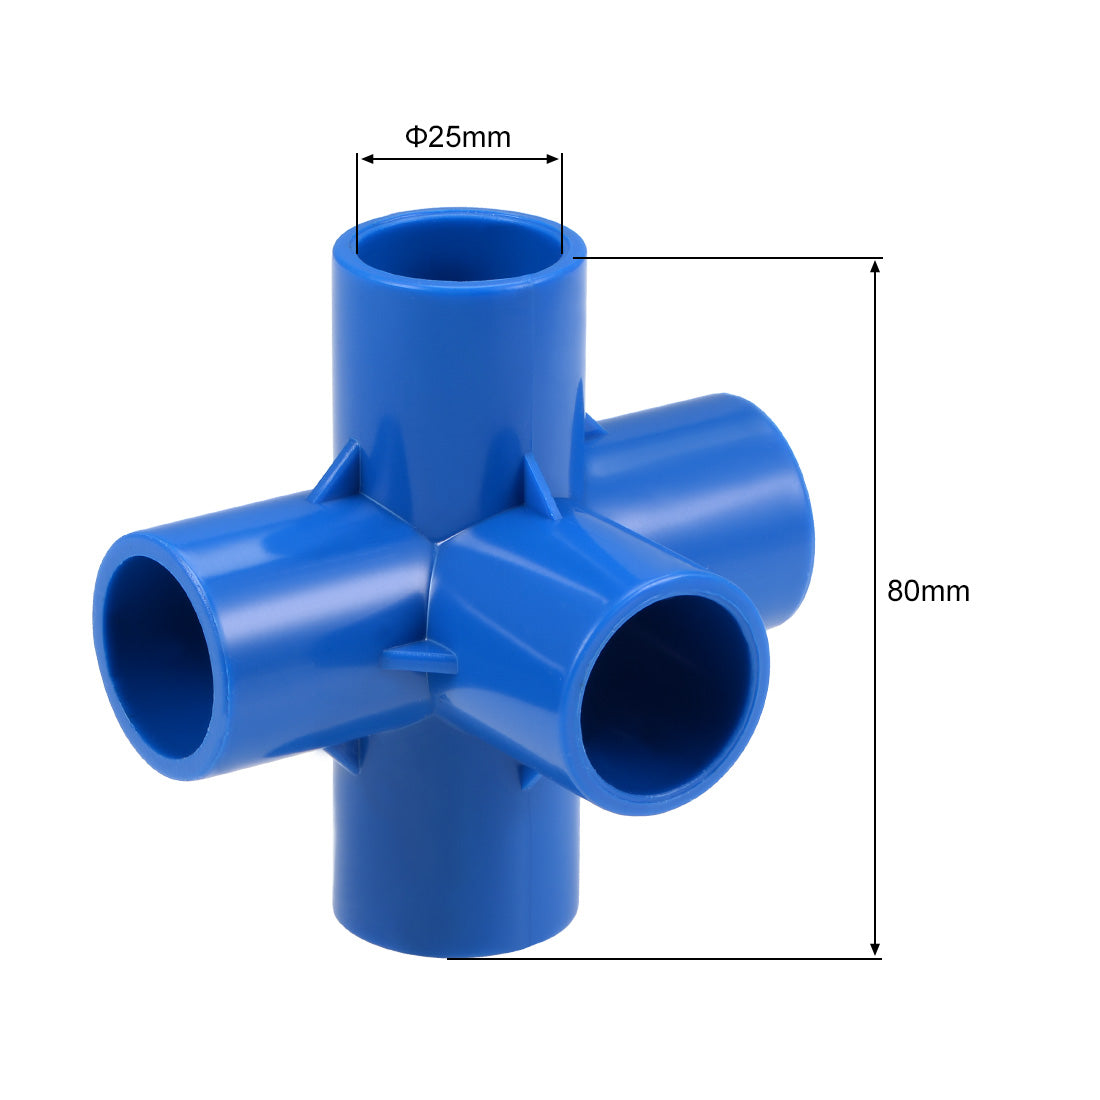 uxcell Uxcell 5 Way 25mm Tee Metric PVC Fitting Elbow - PVC Furniture C Elbow Fittings Blue 10Pcs